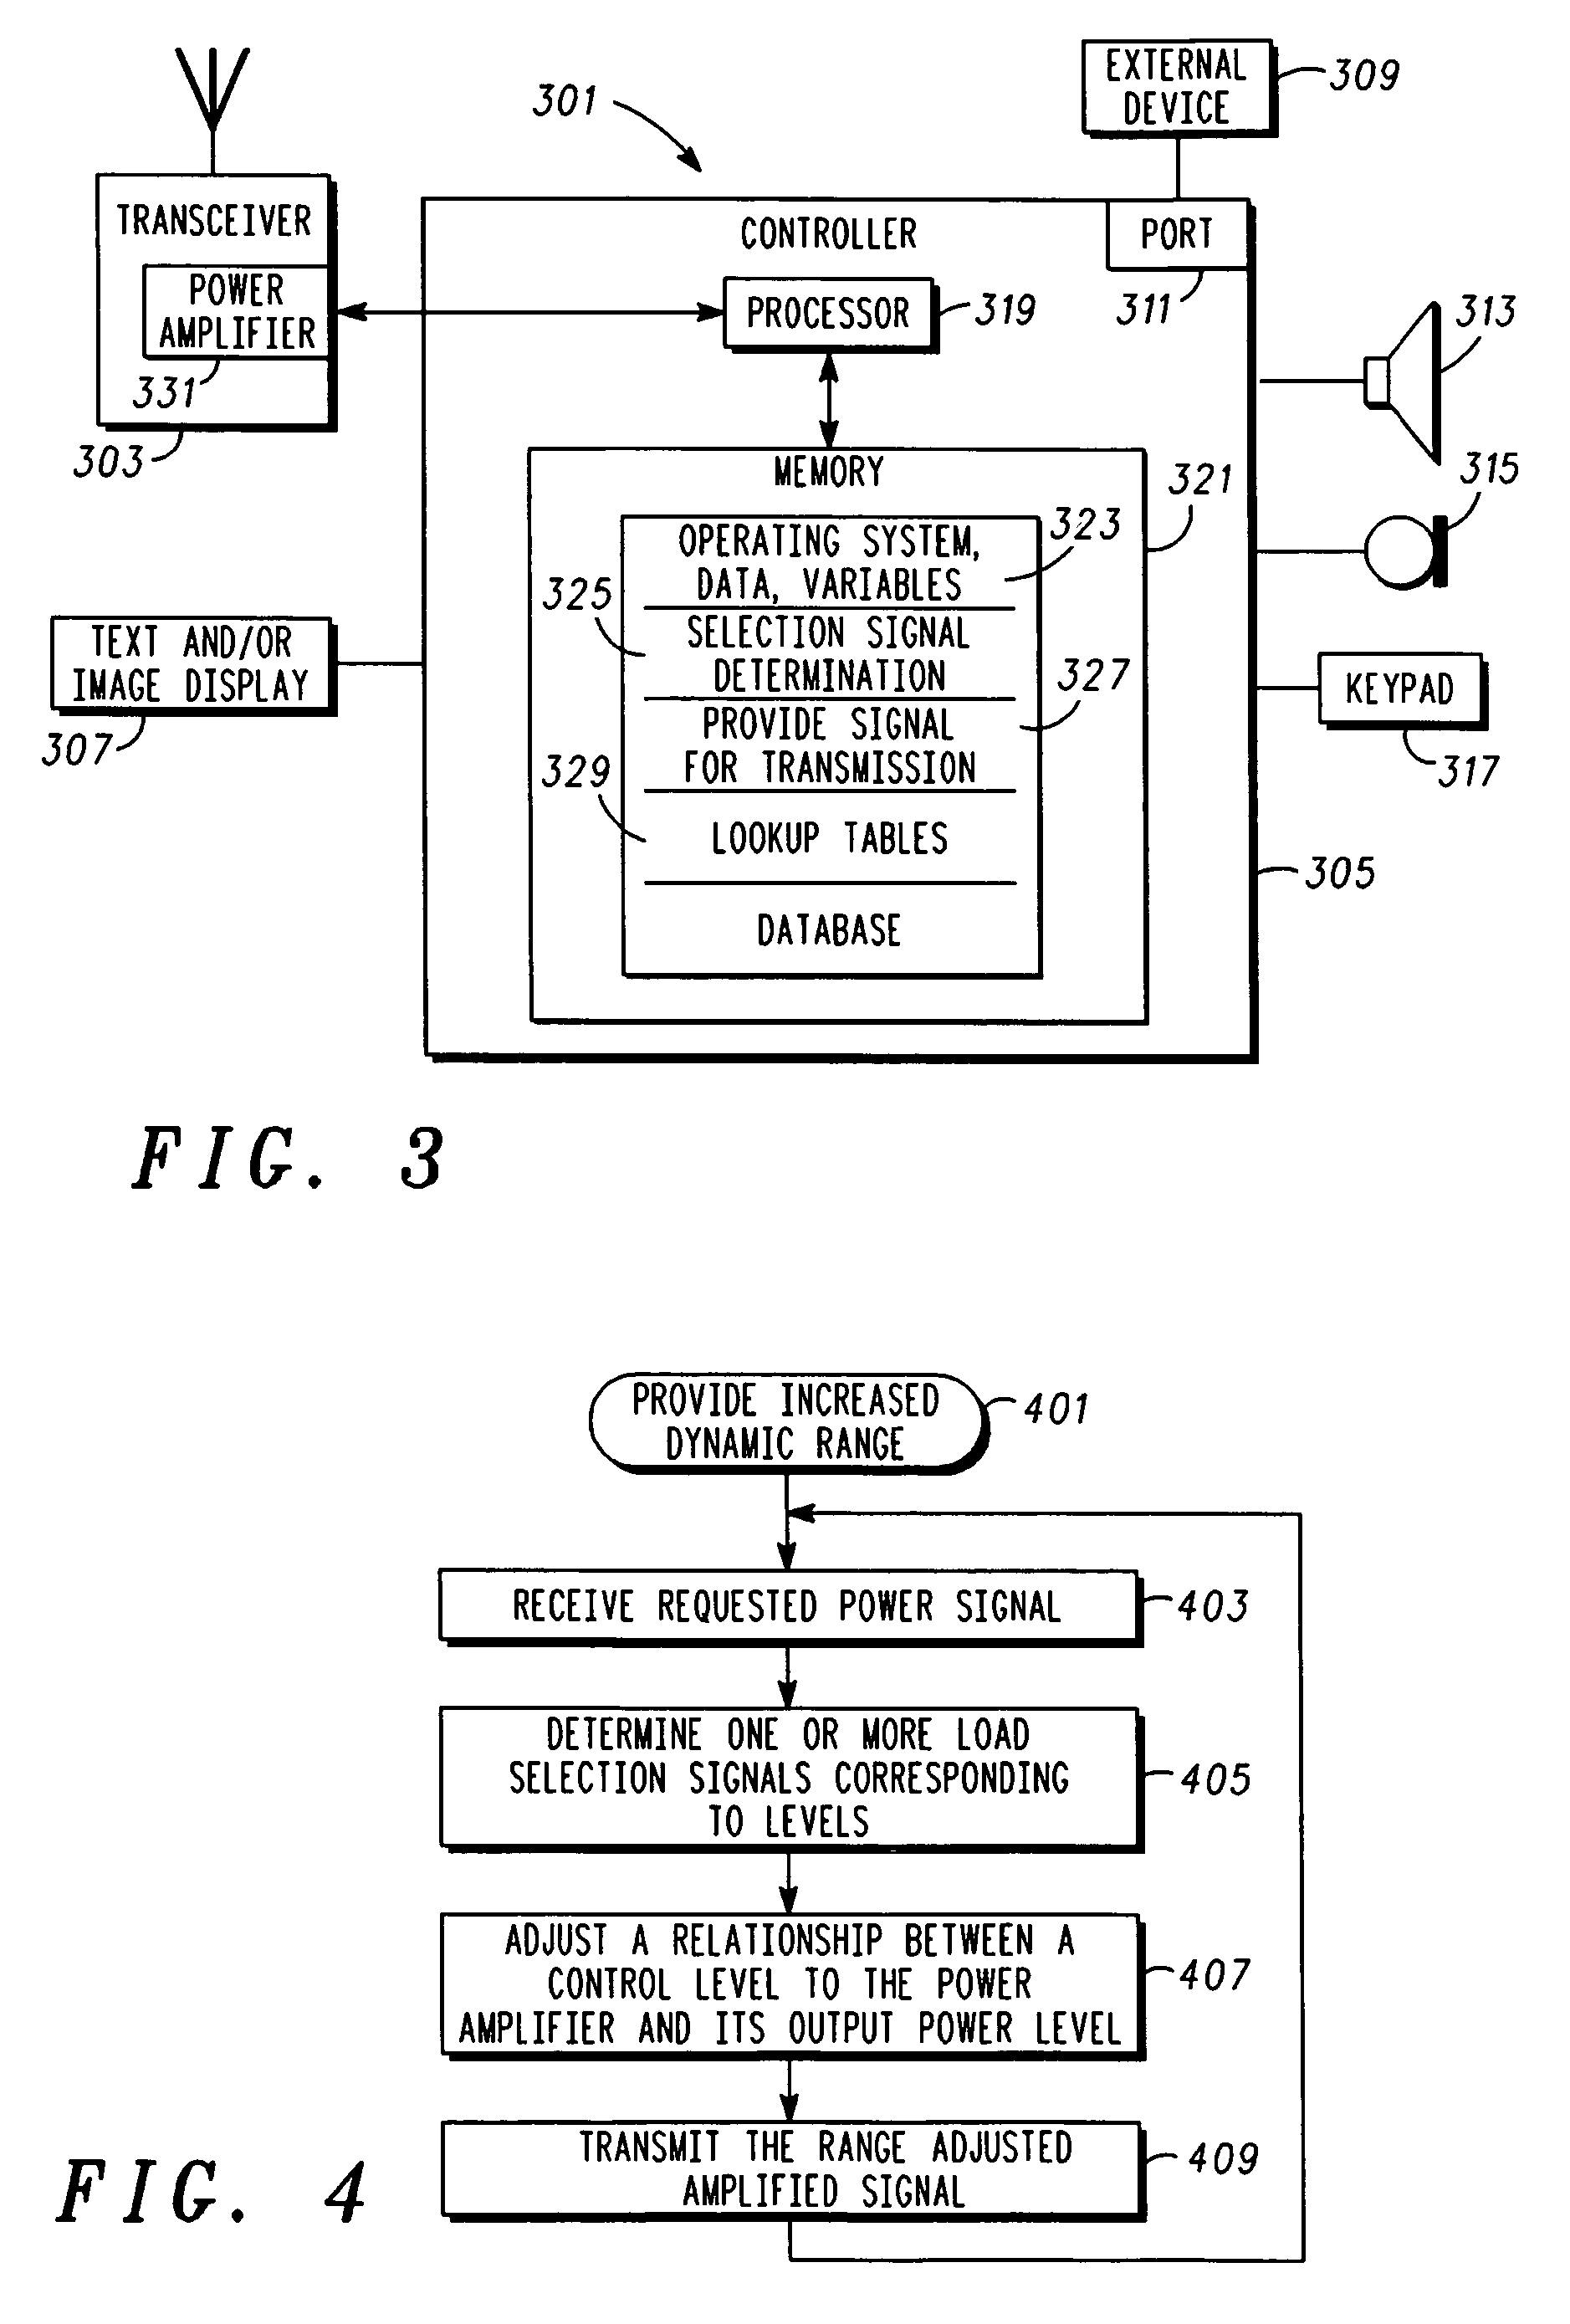 Multi-state load switched power amplifier for polar modulation transmitter